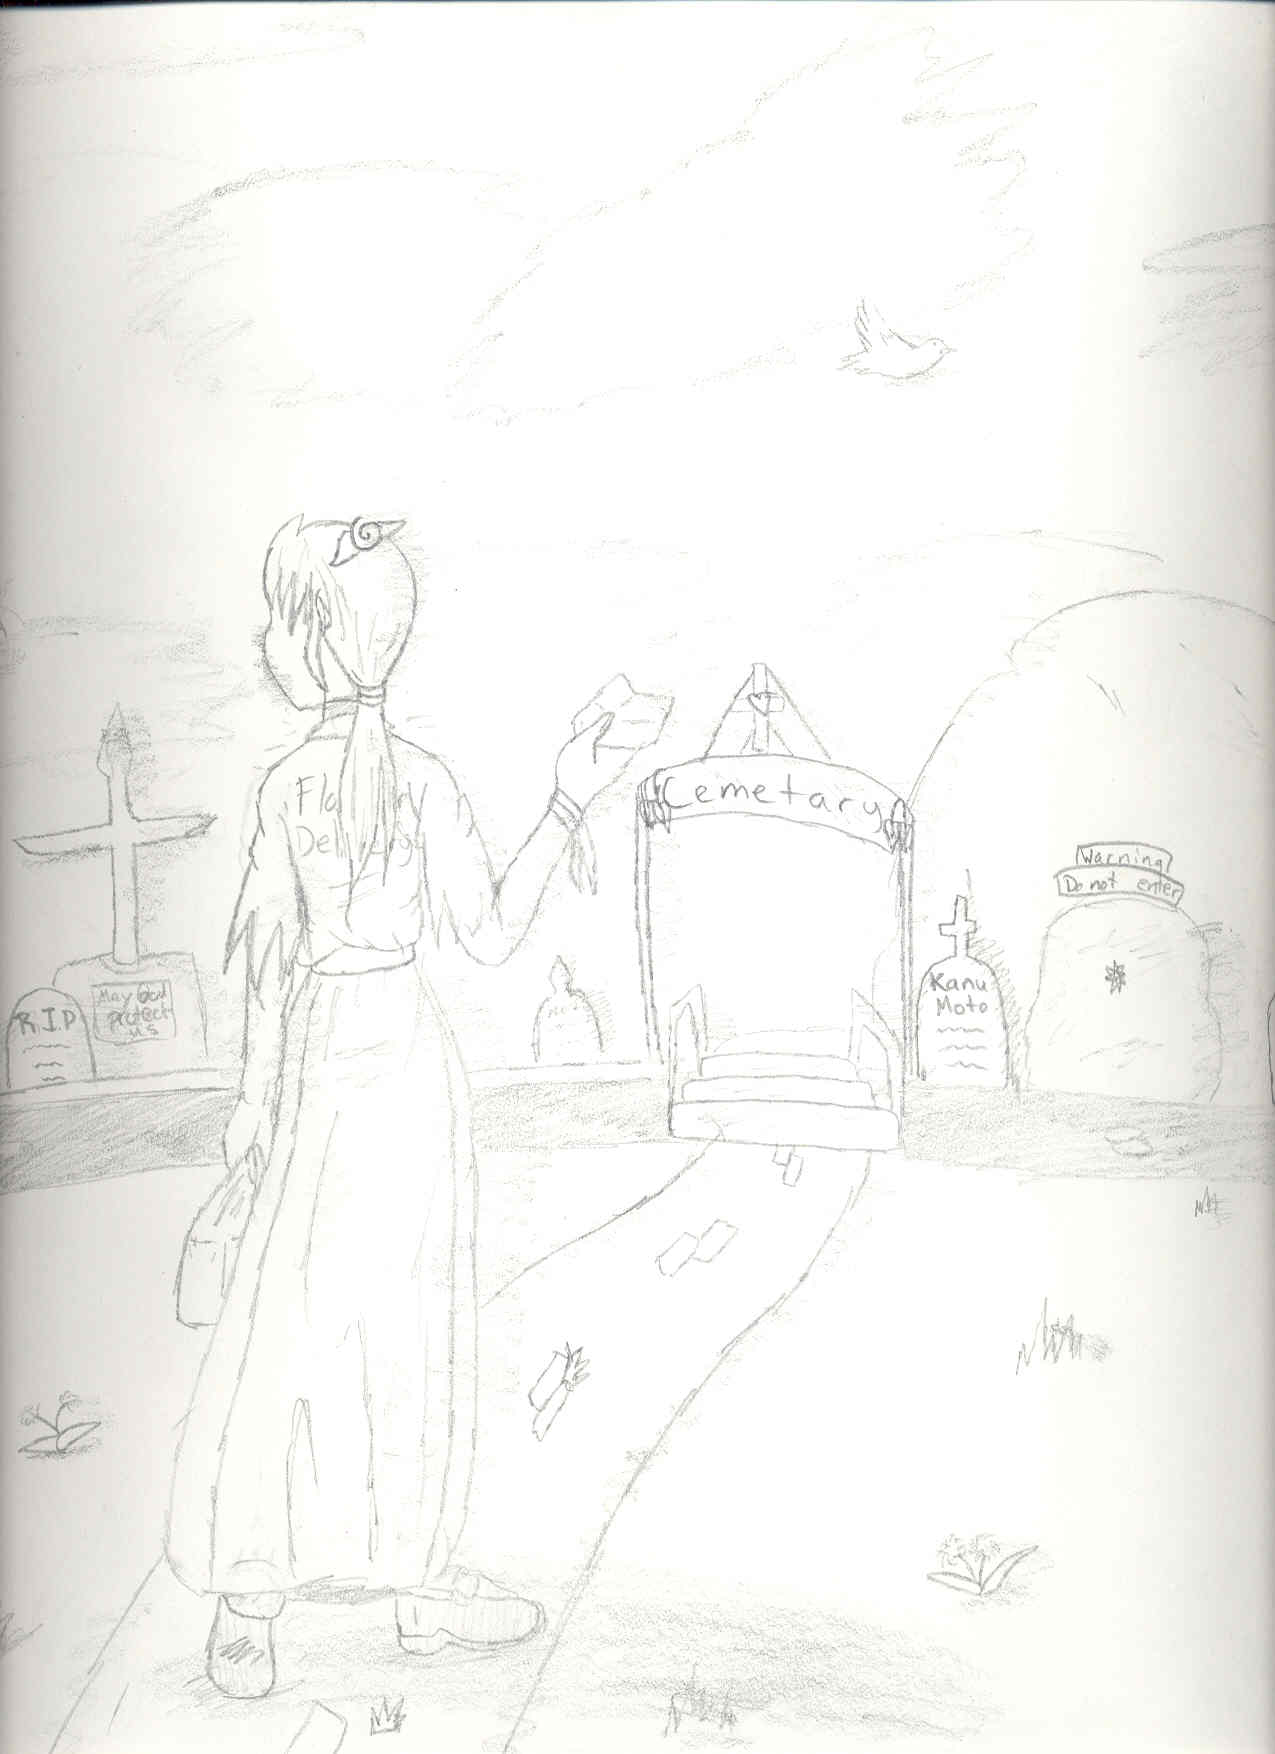 Kashew at cemetary by MeLoveAnime